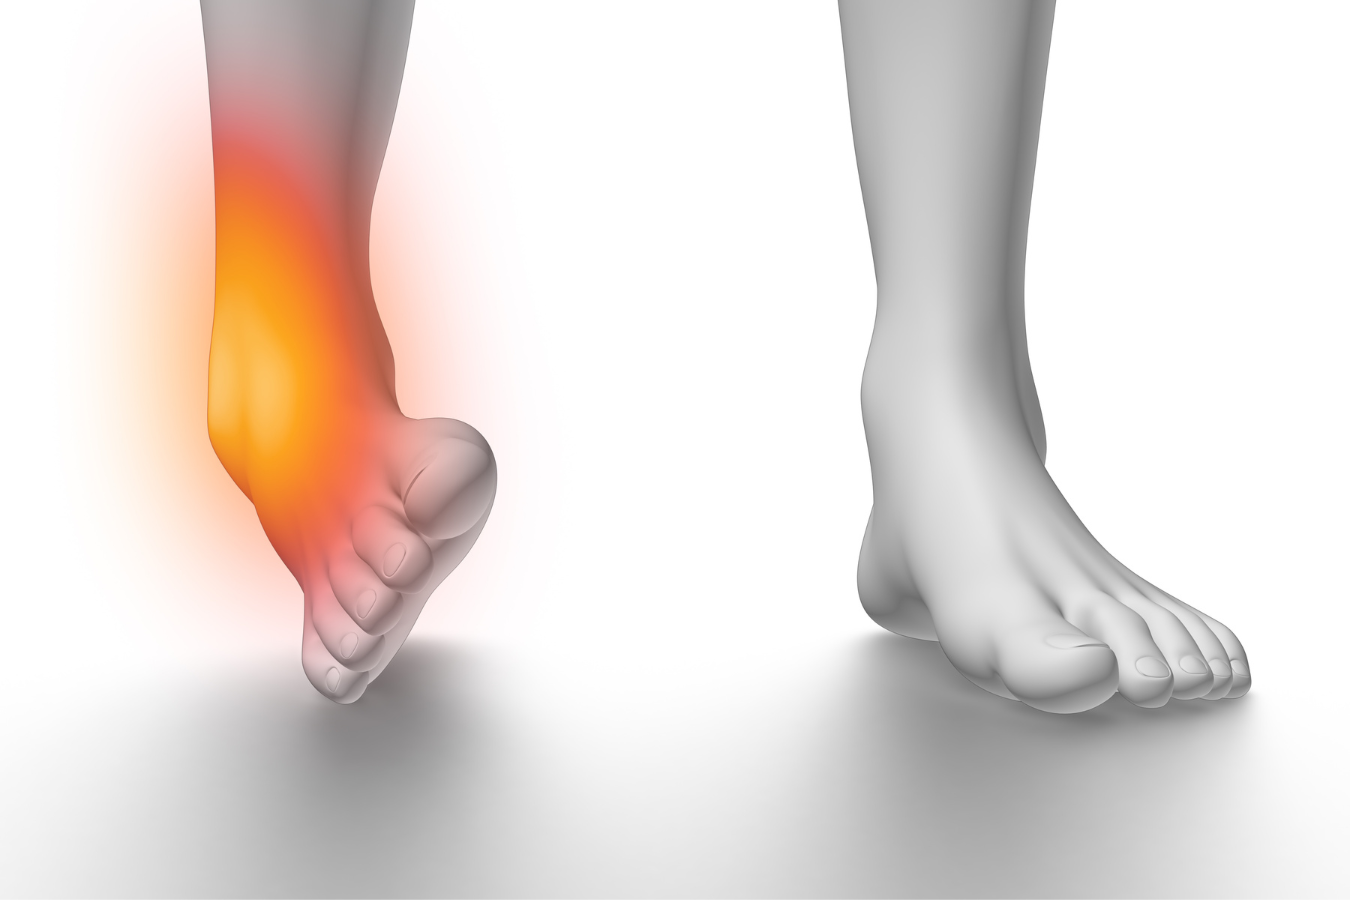 Ankle Sprain Rehab Guideline - Everything you need to know!